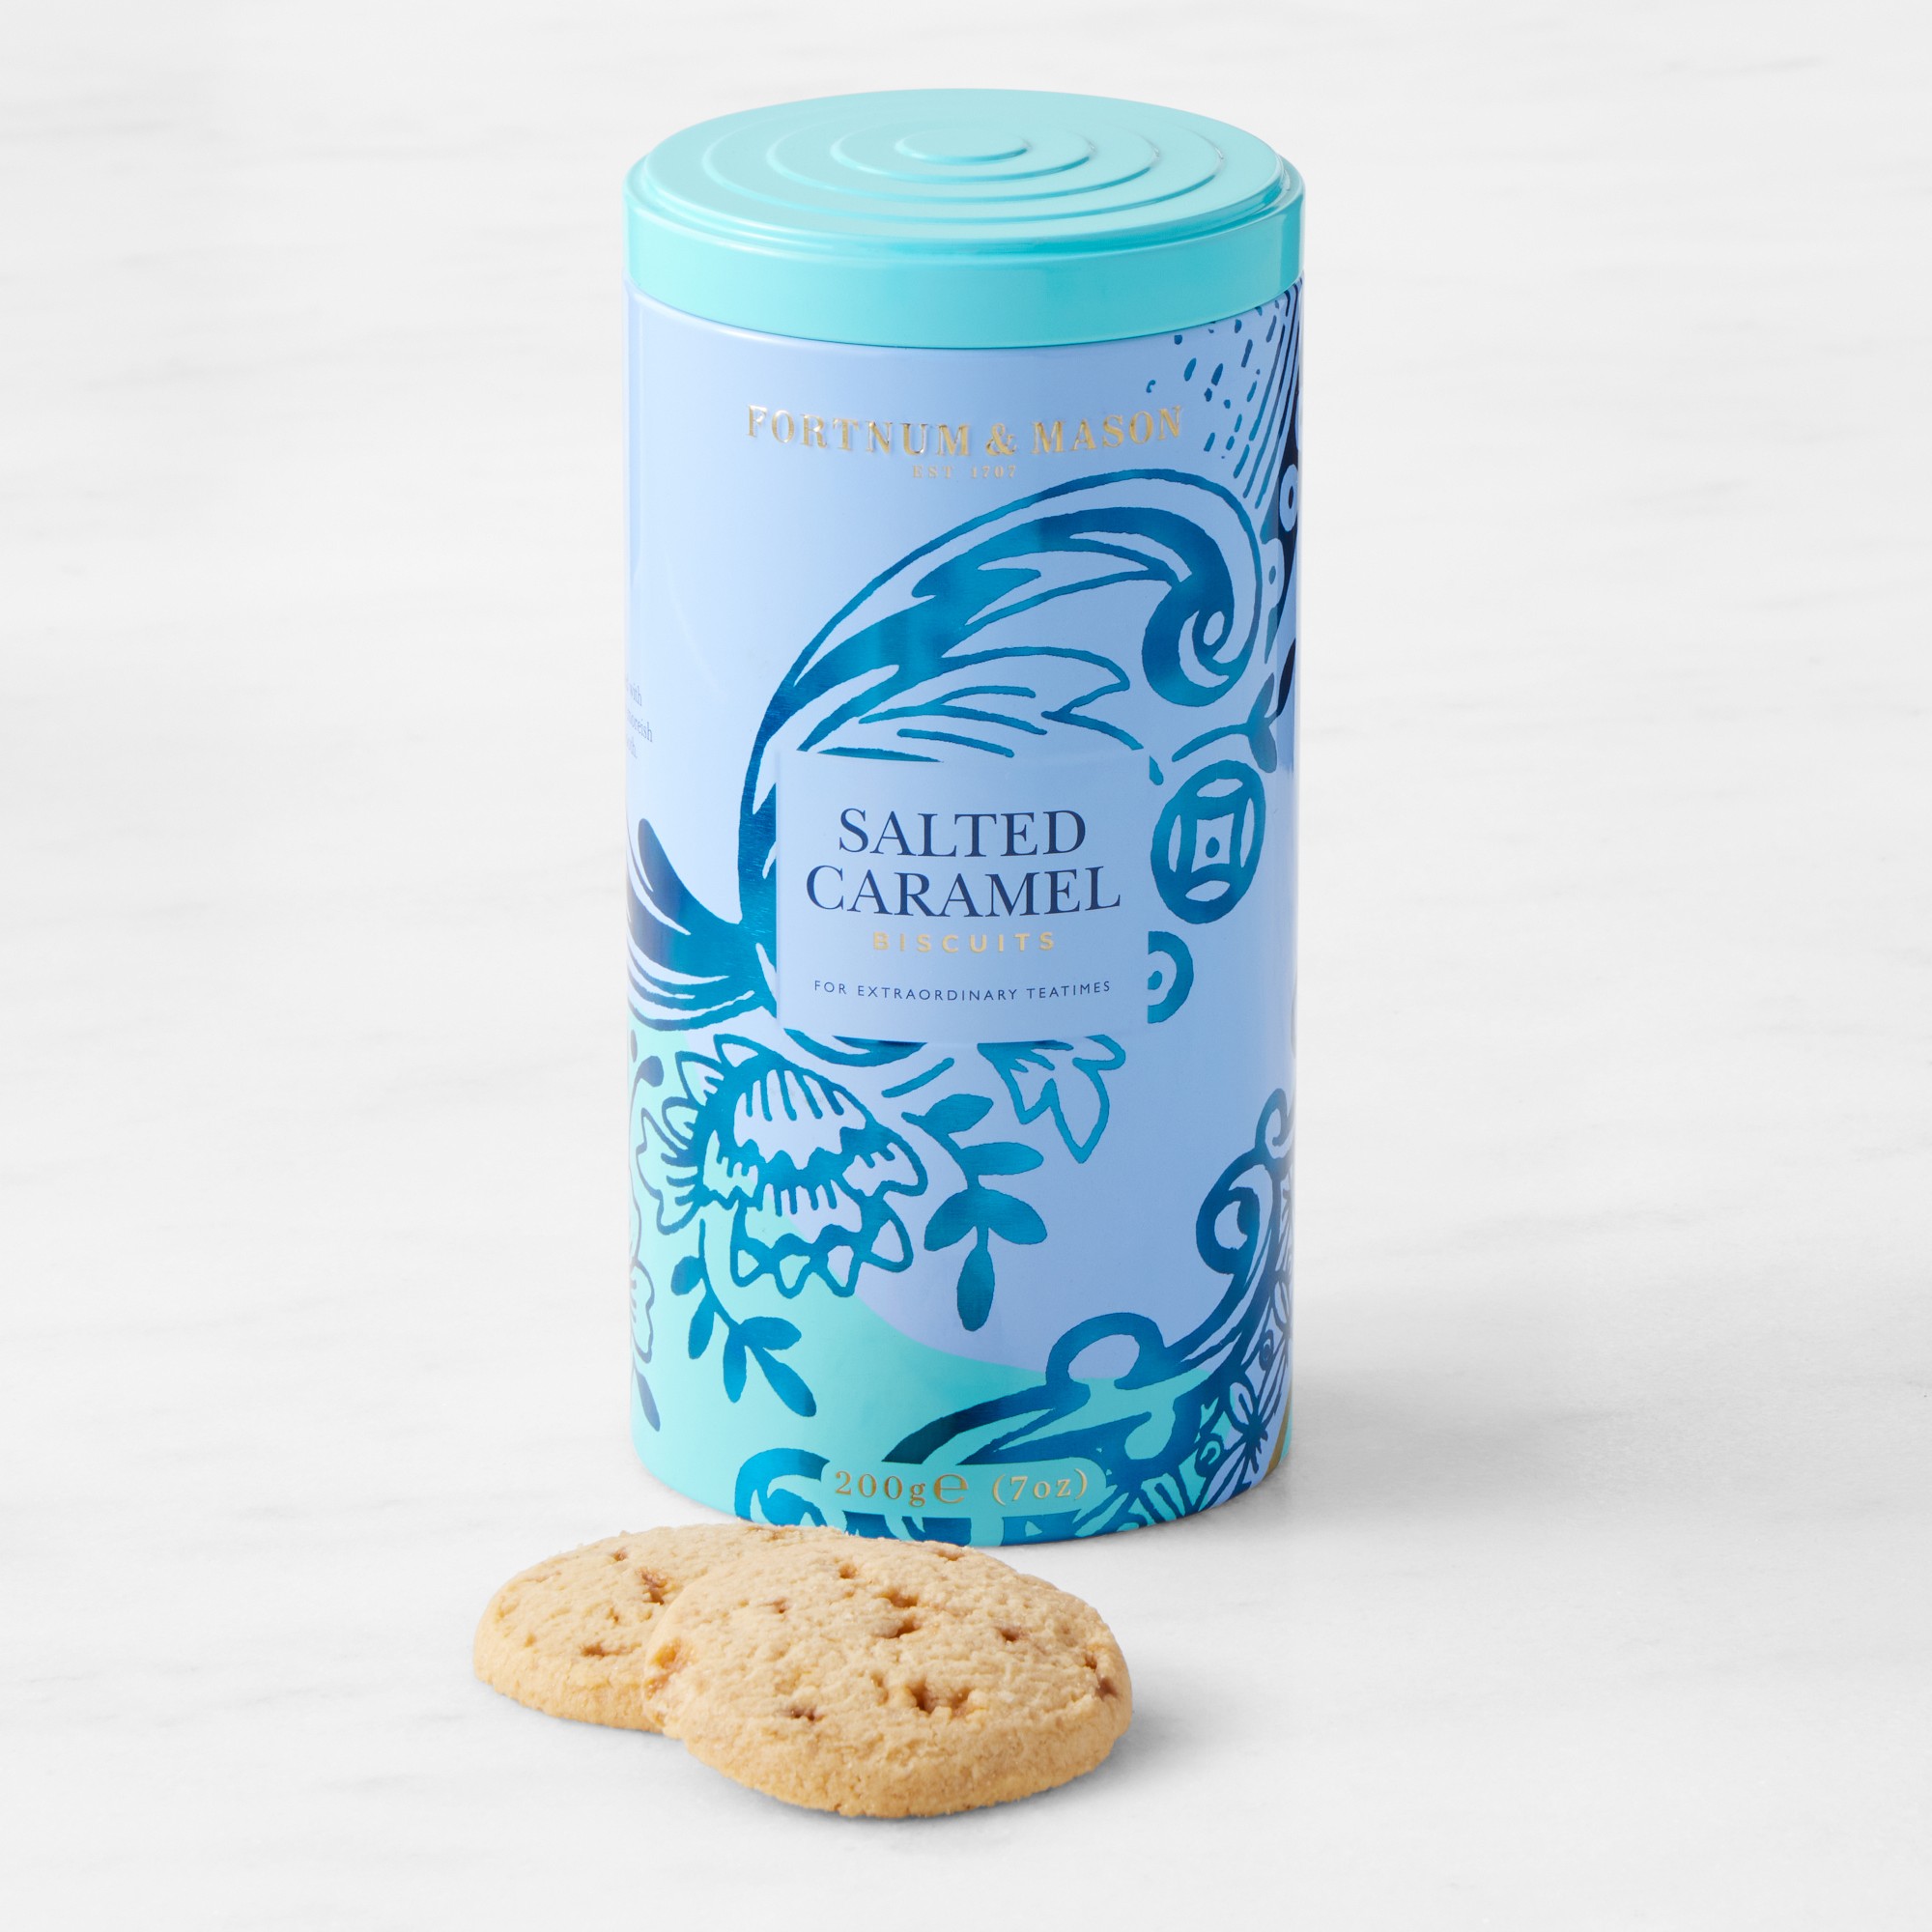 Fortnum & Mason Piccadilly Biscuits, Salted Caramel